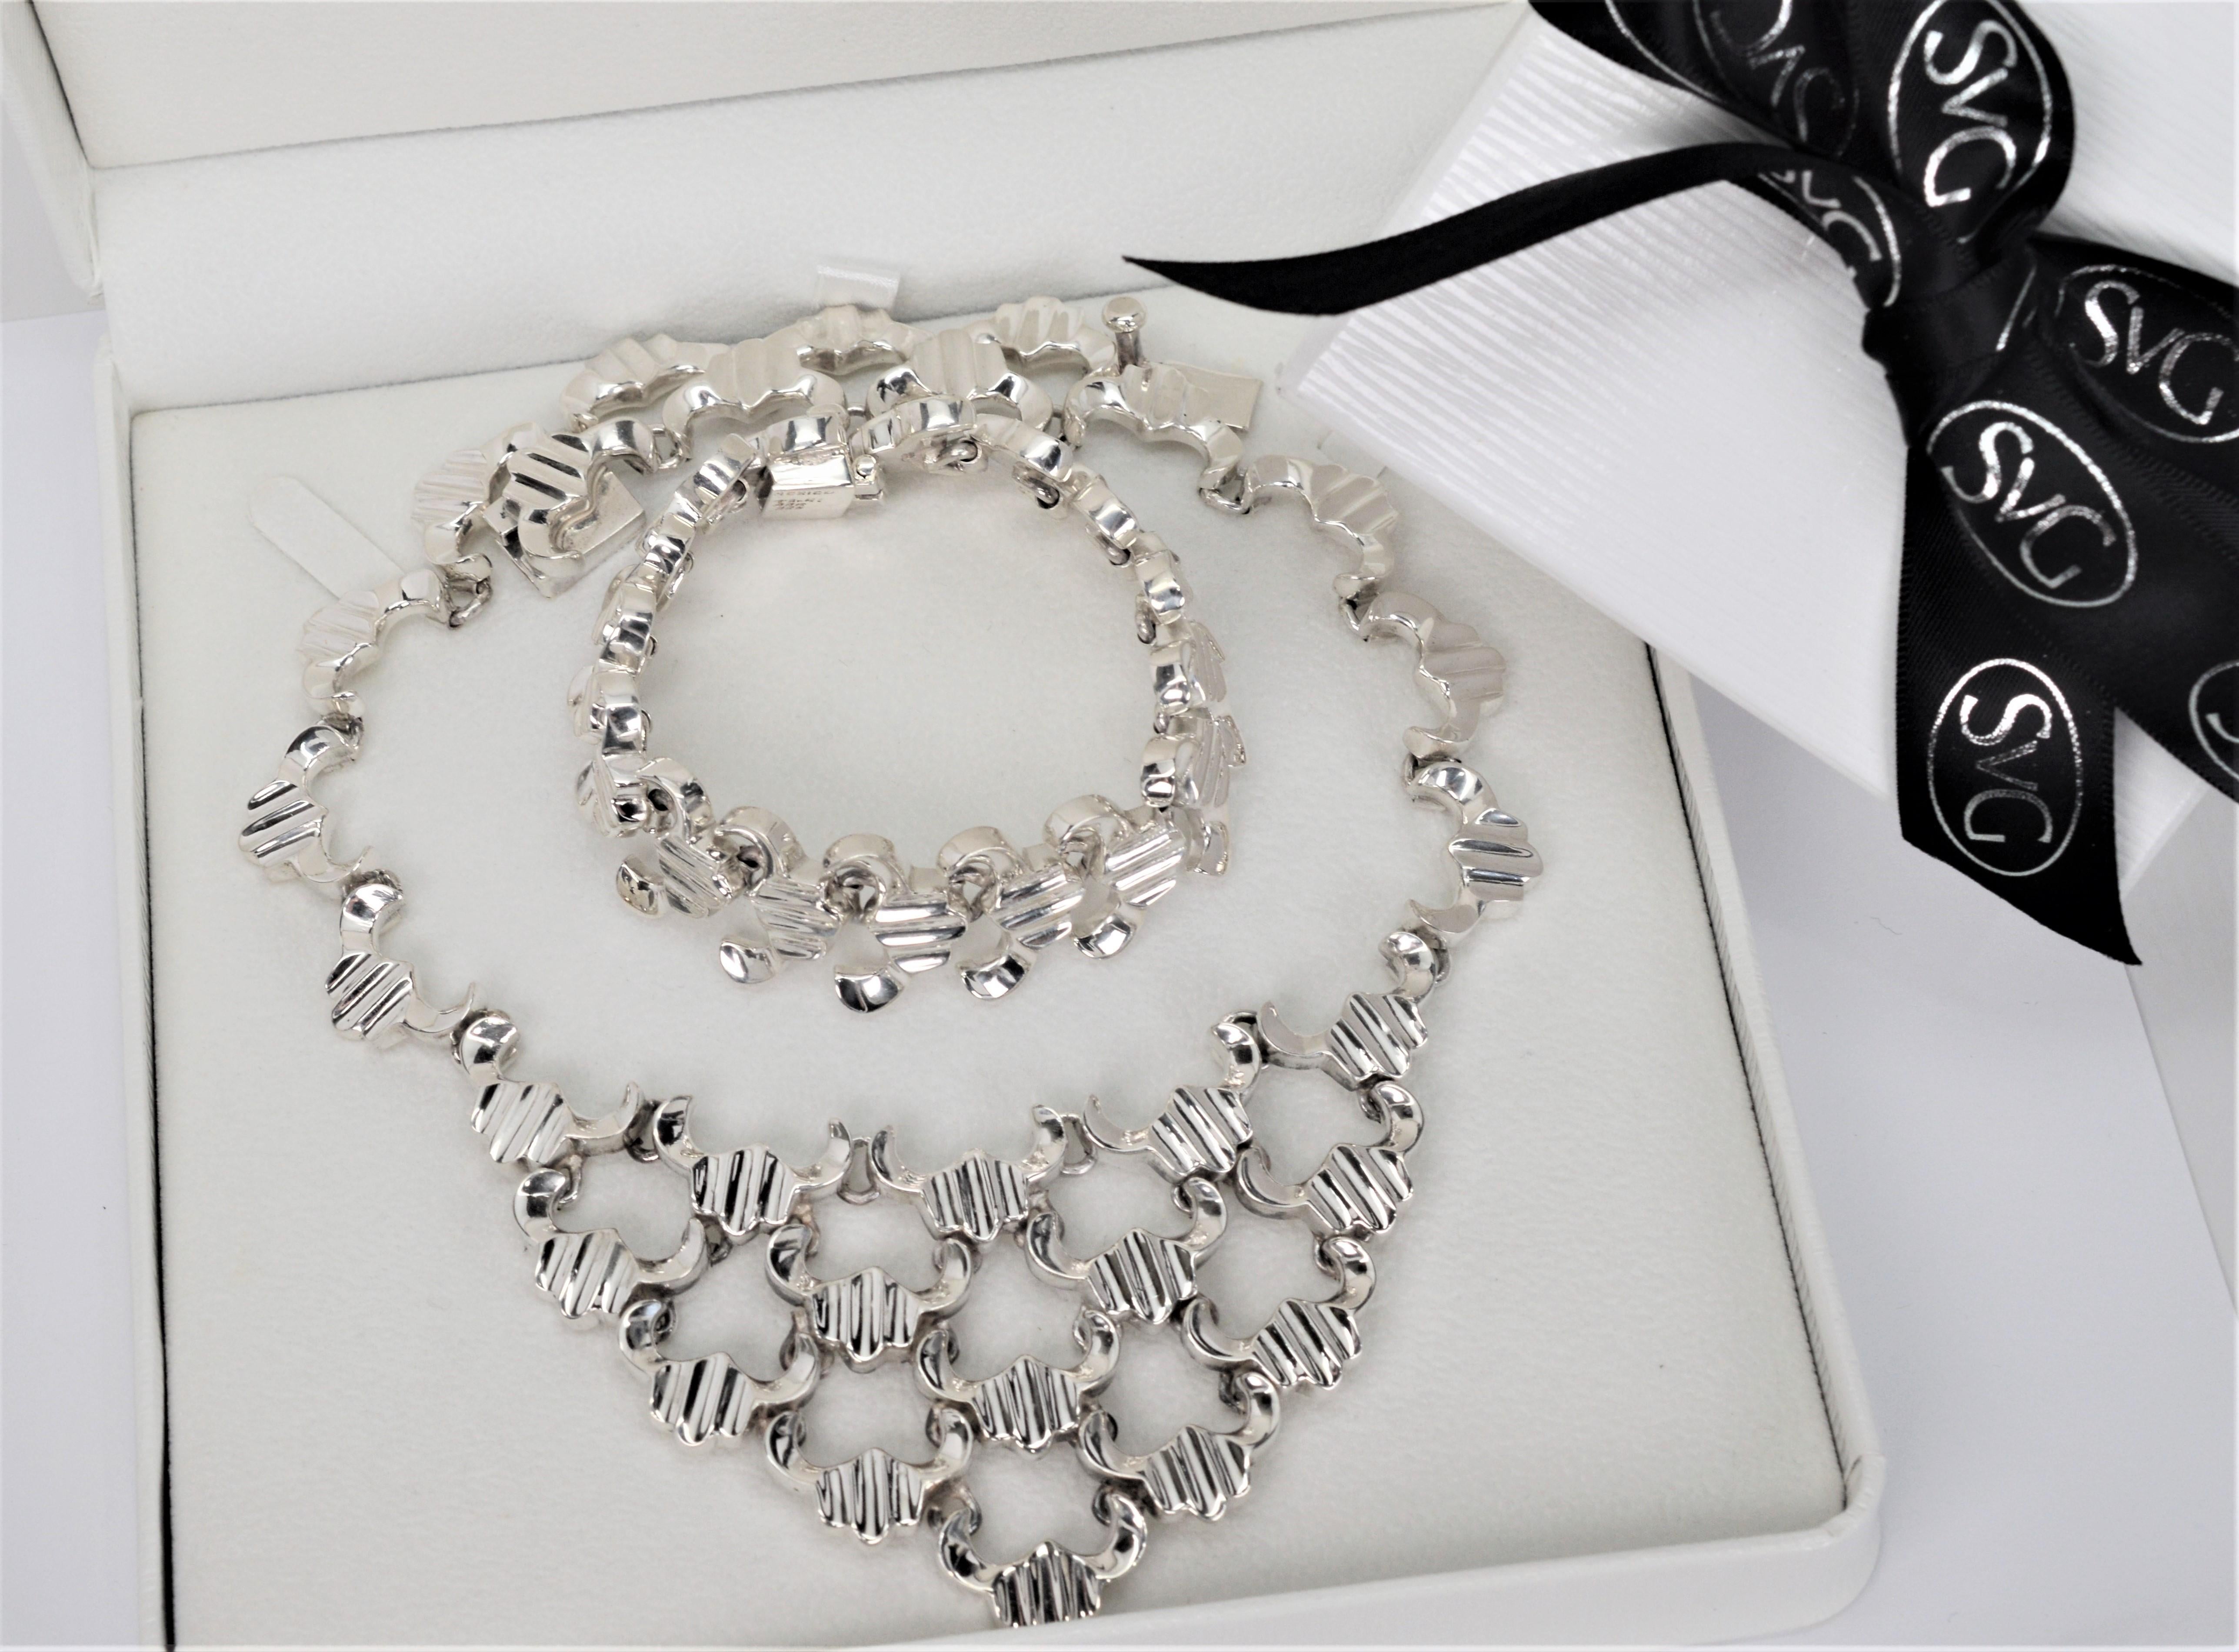 Dramatic in sterling silver, this necklace and bracelet set makes a bold design statement when accessorizing and elevates your casual look or that little black dress. Skilled Mexican silversmithing is evident in the forged 1/2 inch links that